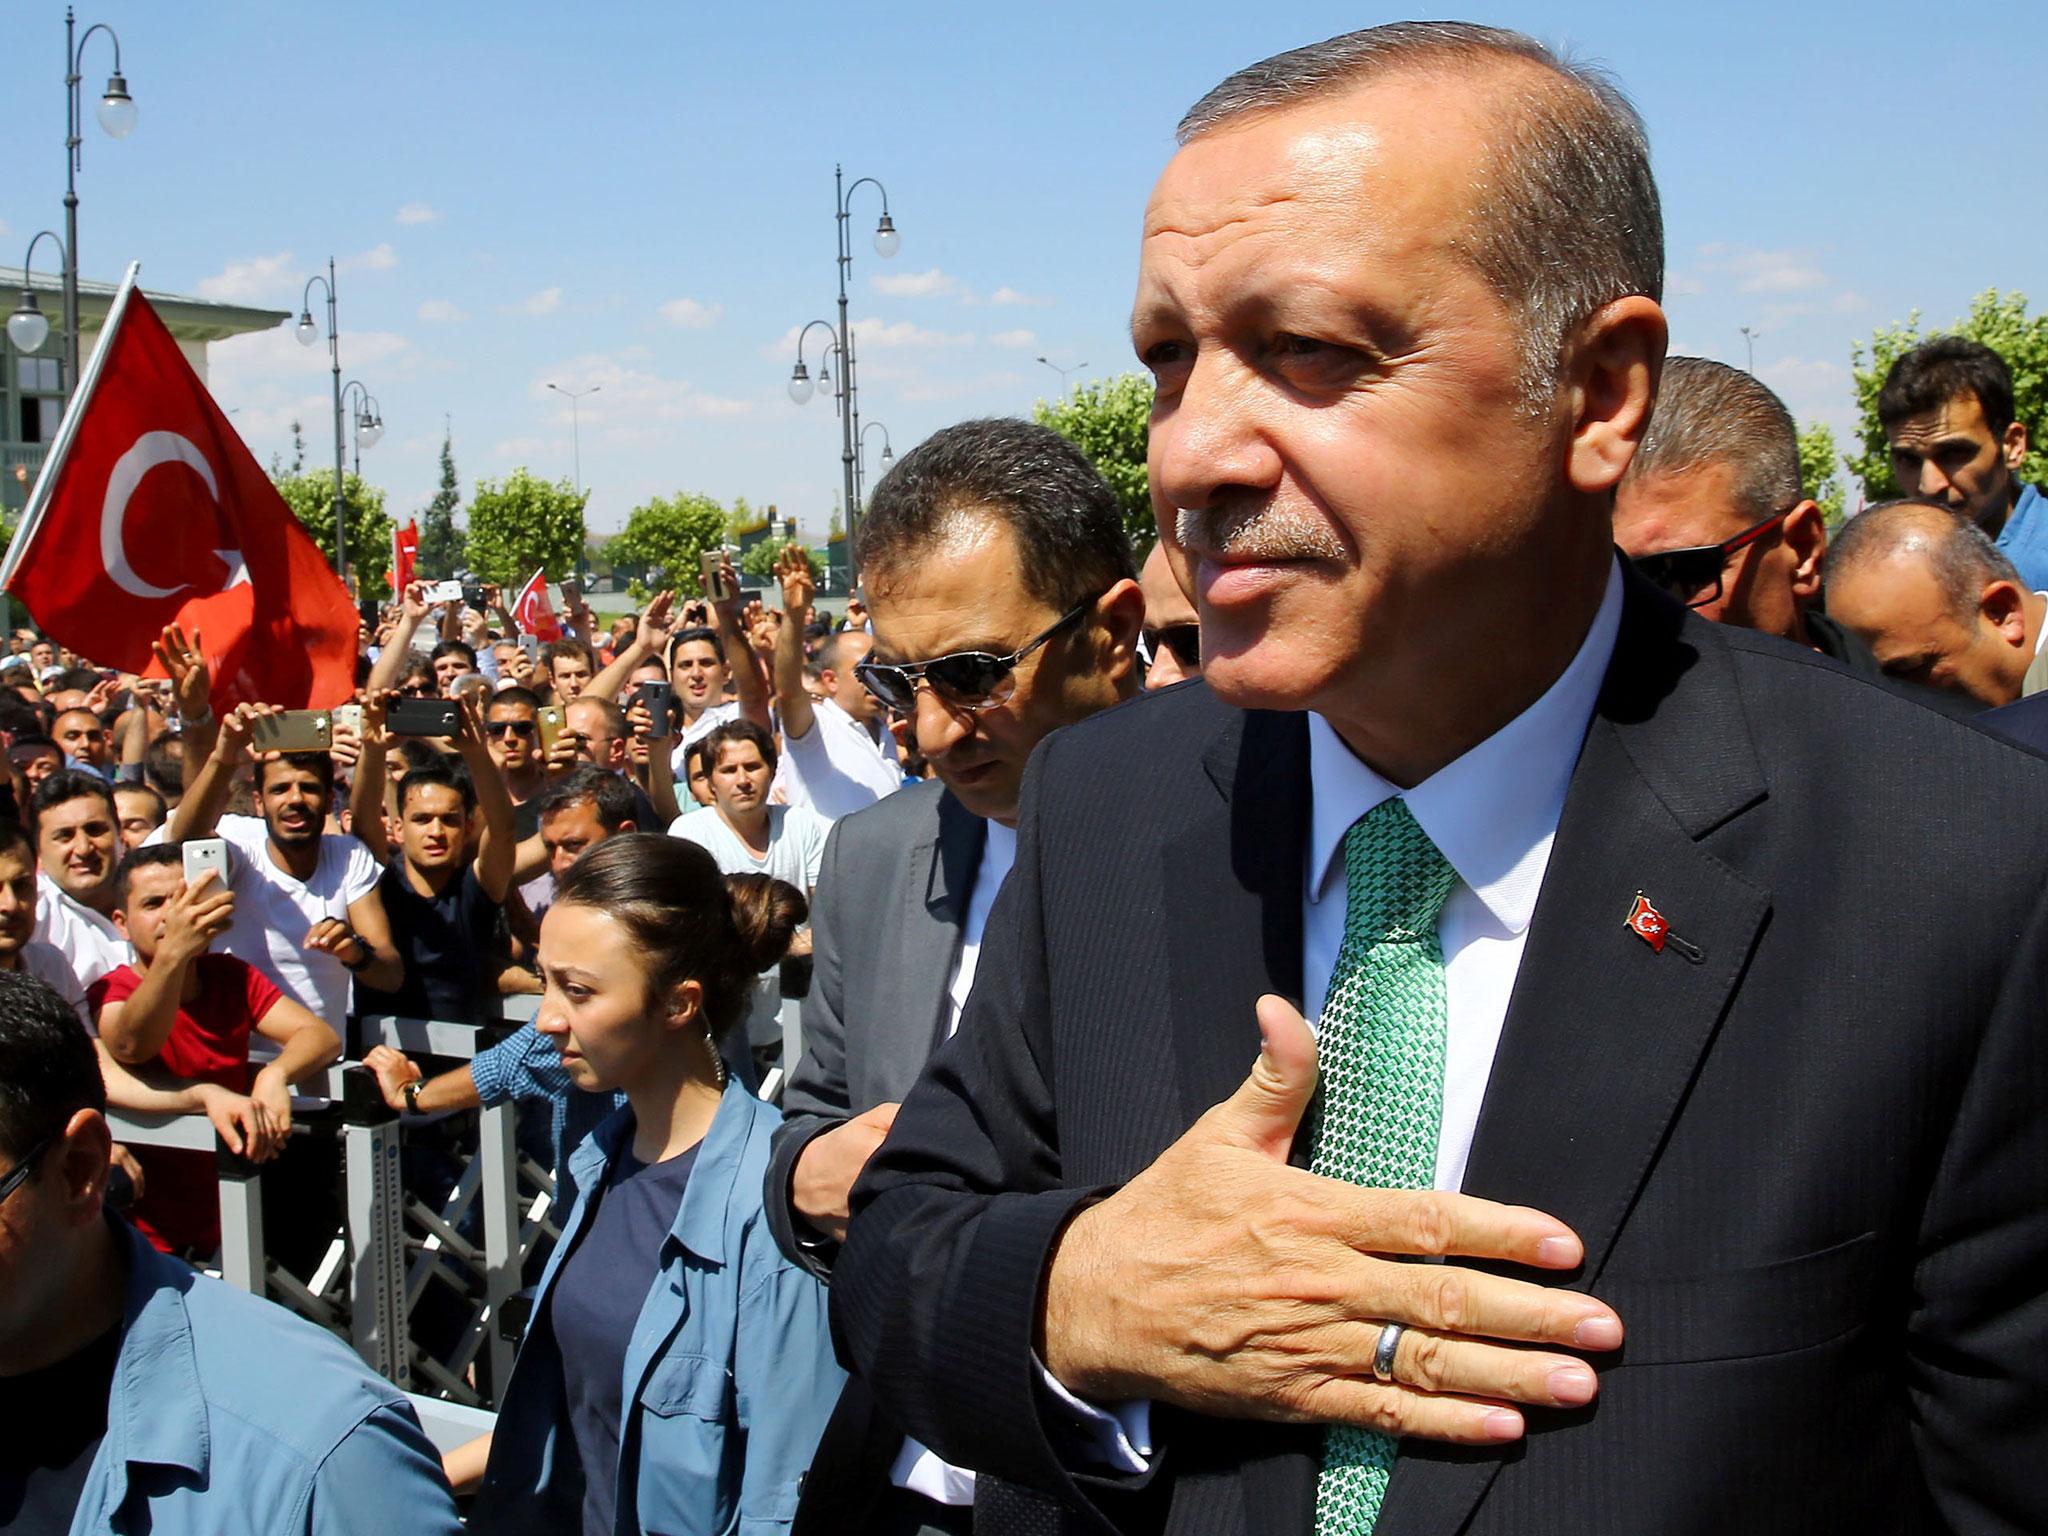 Turkish President Recep Tayyip Erdogan's threat to bring back the death penalty has meant he has clashed with EU leaders 